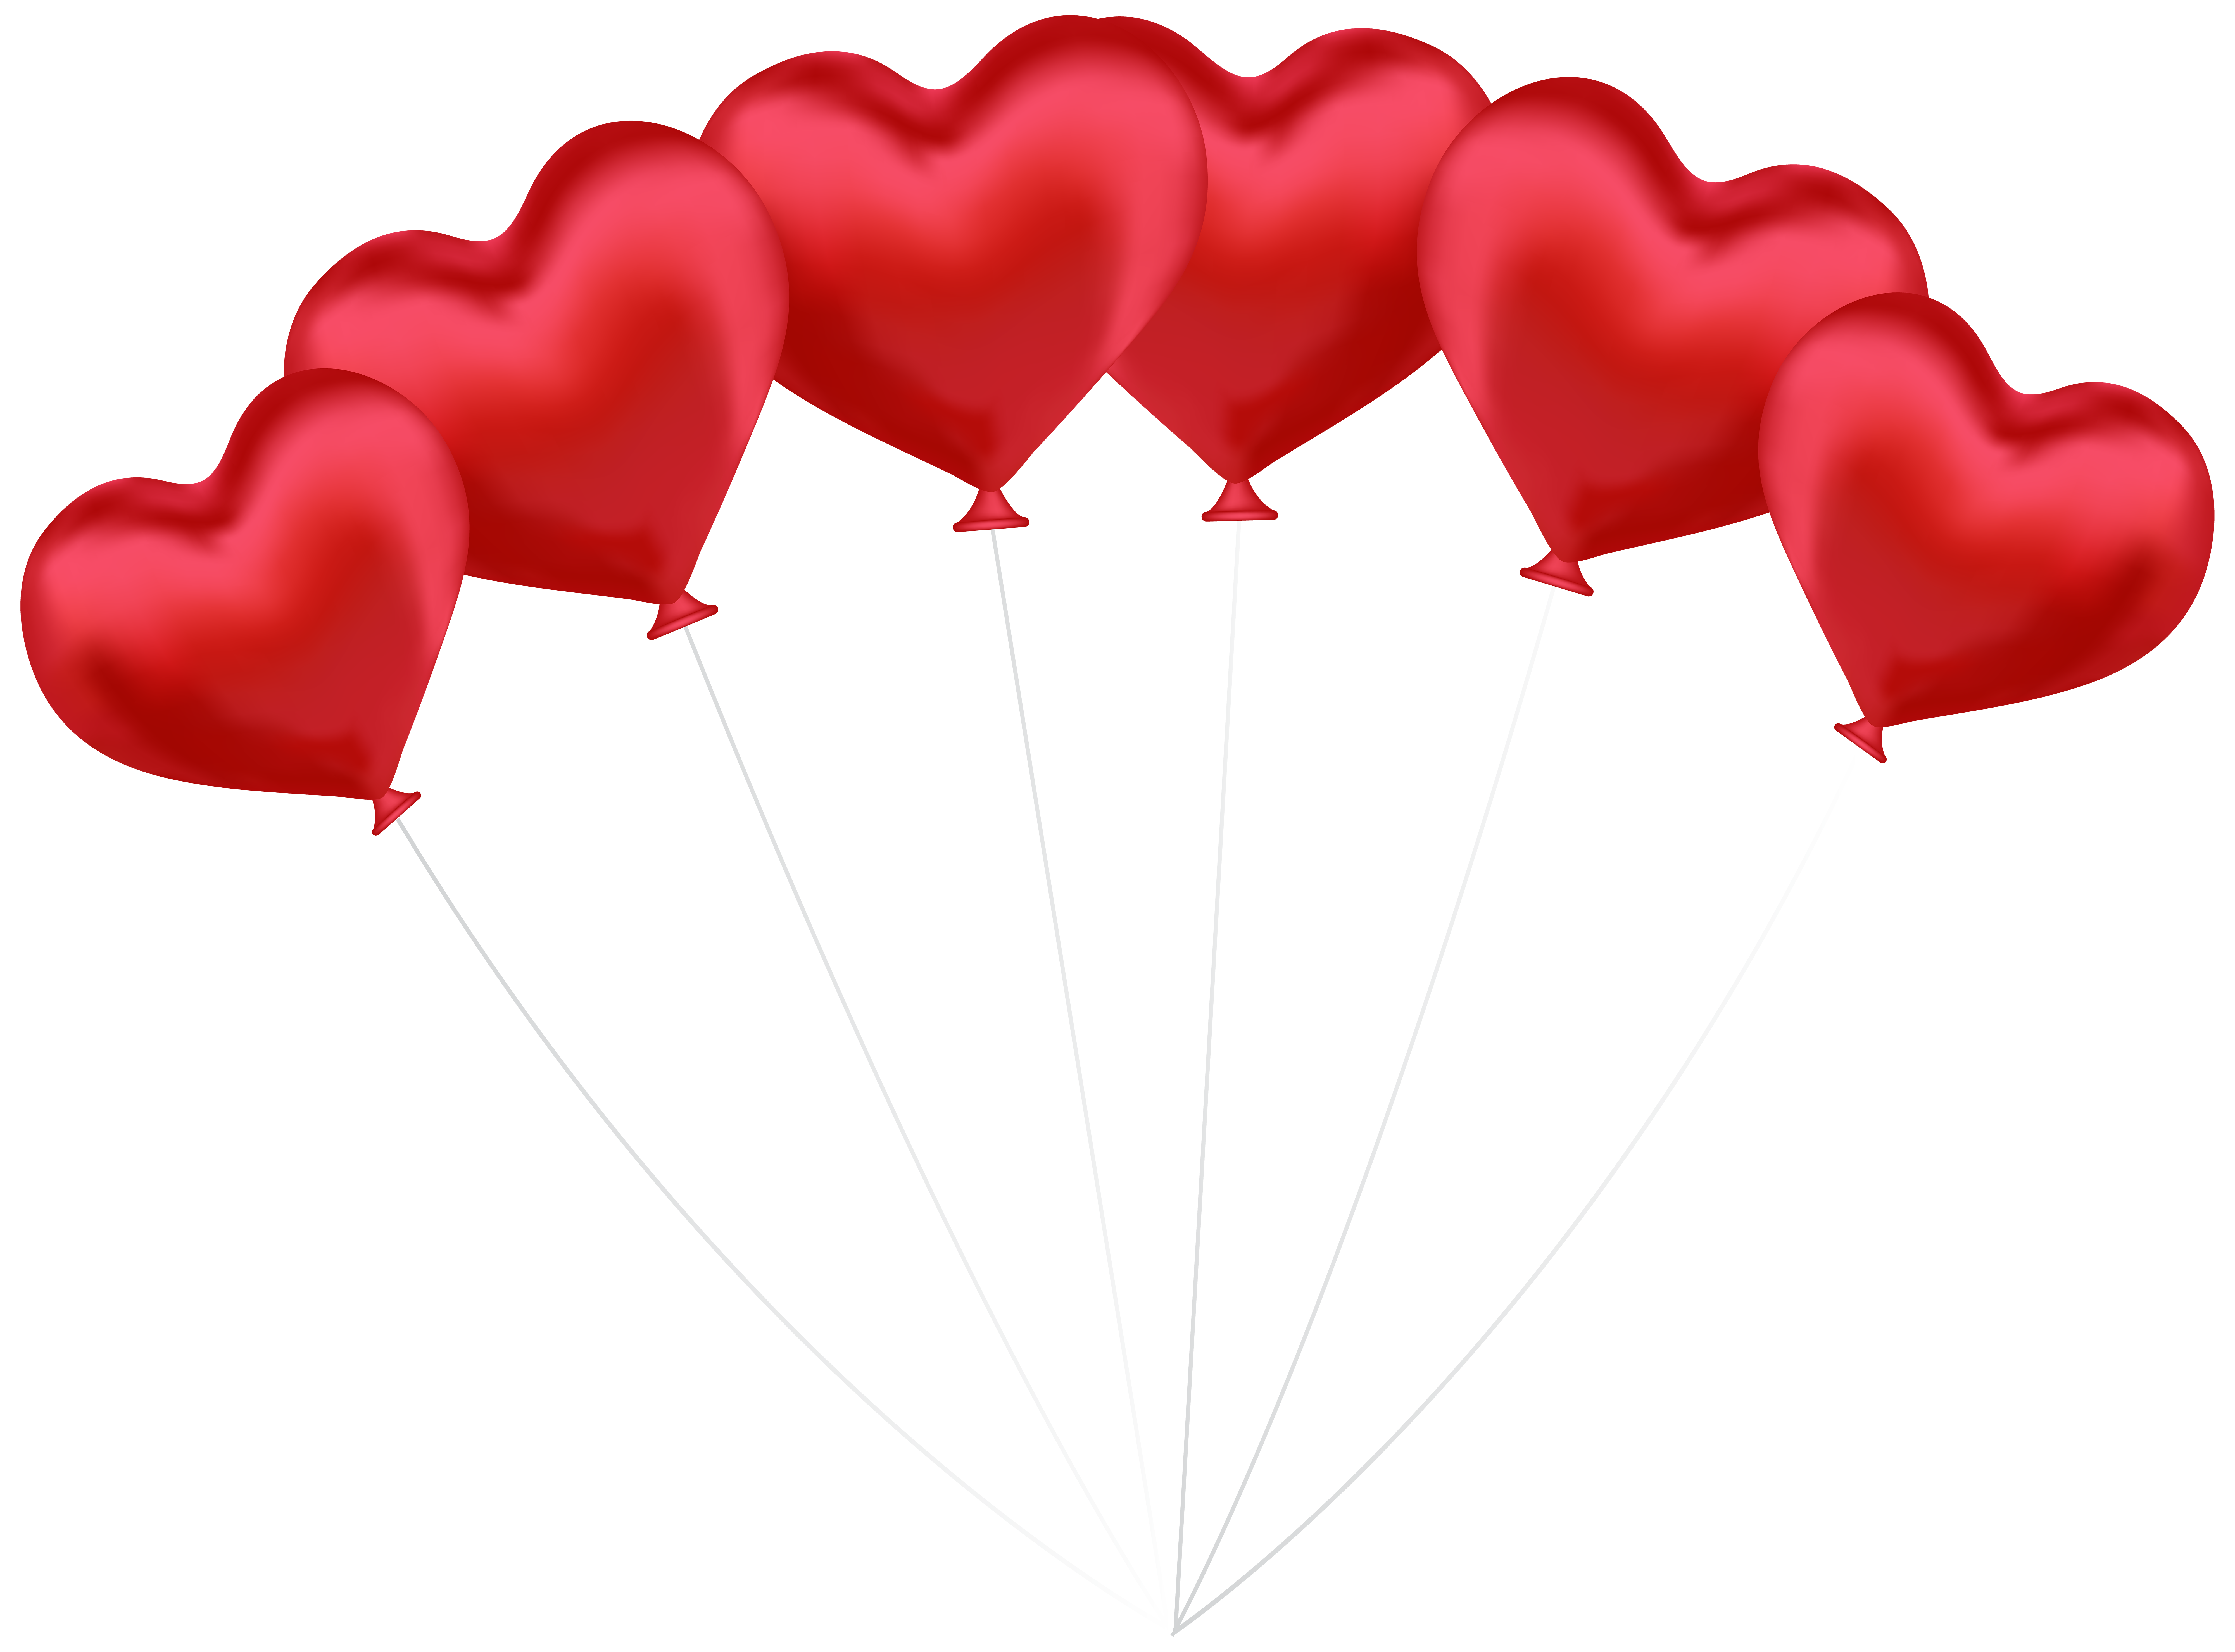 clipart of hearts and balloons